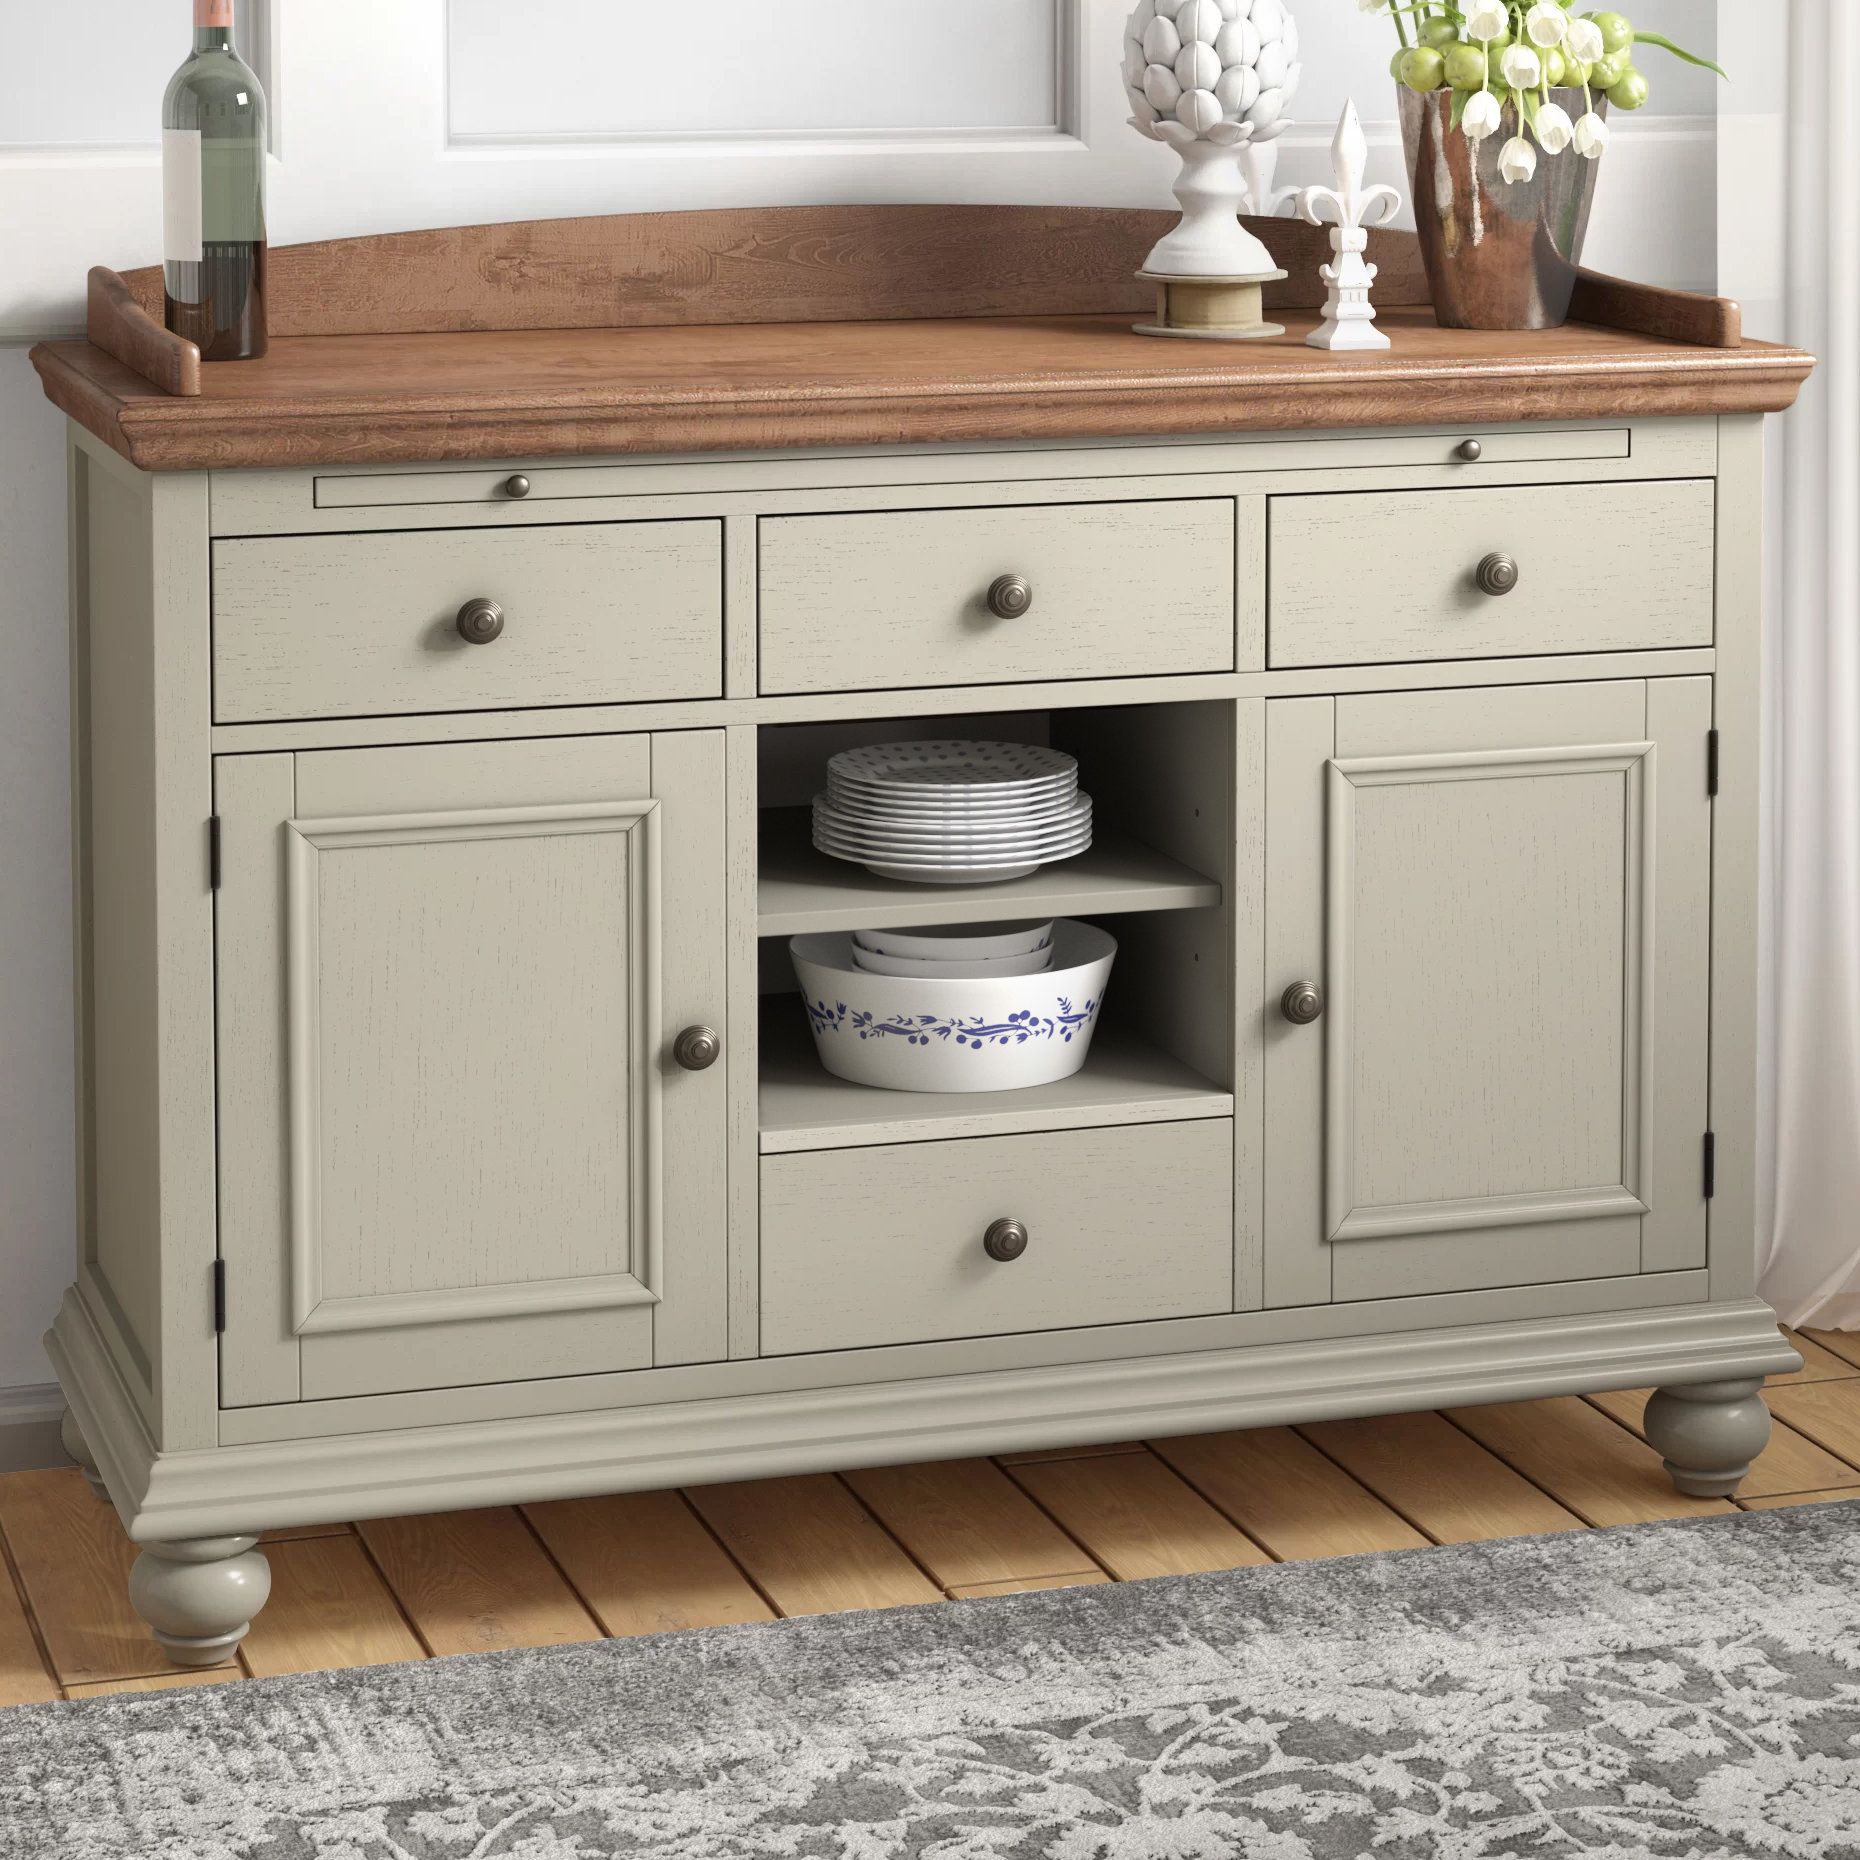 Slim Sideboard | Wayfair With Recent Chicoree Charlena Sideboards (View 20 of 20)